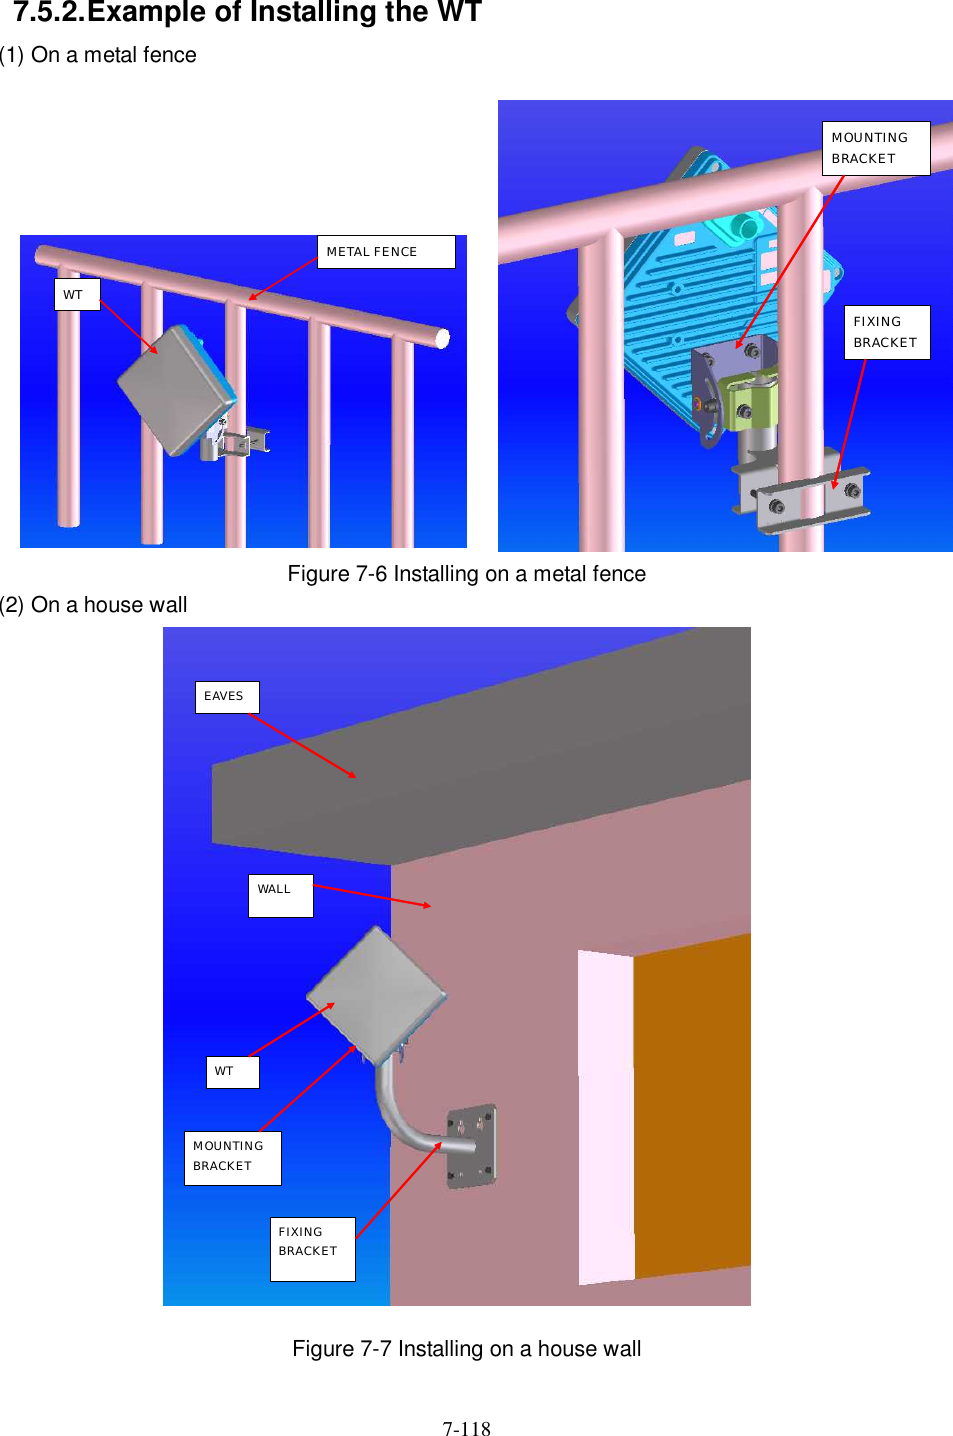   7-118   7.5.2. Example of Installing the WT (1) On a metal fence              Figure 7-6 Installing on a metal fence (2) On a house wall                    Figure 7-7 Installing on a house wall MOUNTING BRACKET FIXING  BRACKET METAL FENCE WT  EAVES WT MOUNTING BRACKET FIXING BRACKET WALL 